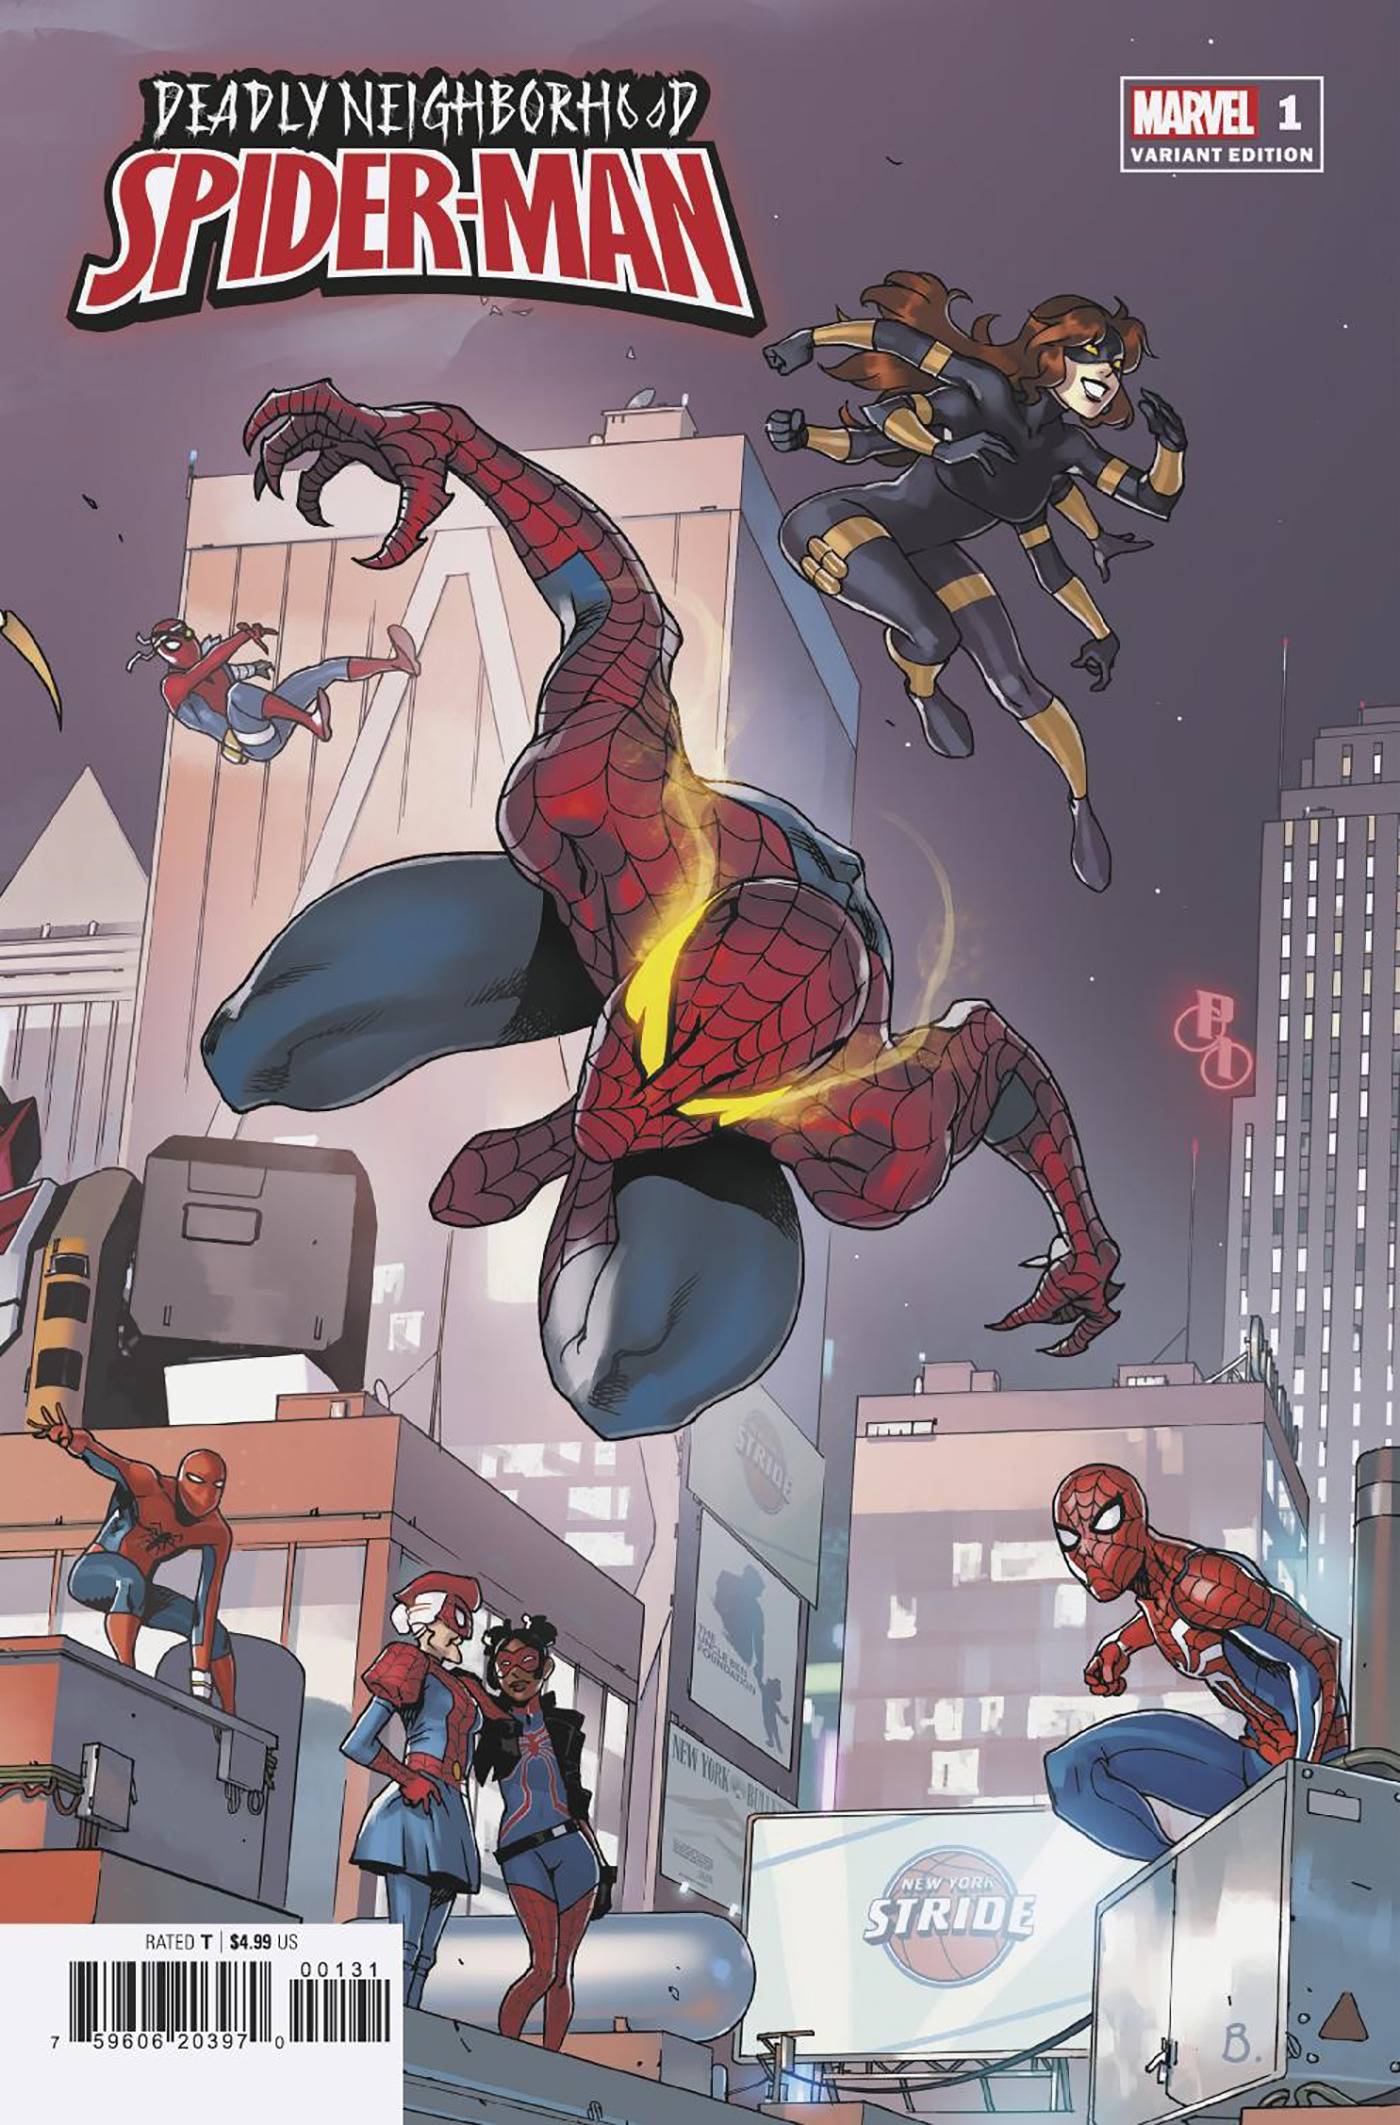 10/19/2022 DEADLY NEIGHBORHOOD SPIDER-MAN #1 (OF 5) BENGAL CONNECT VARIANT